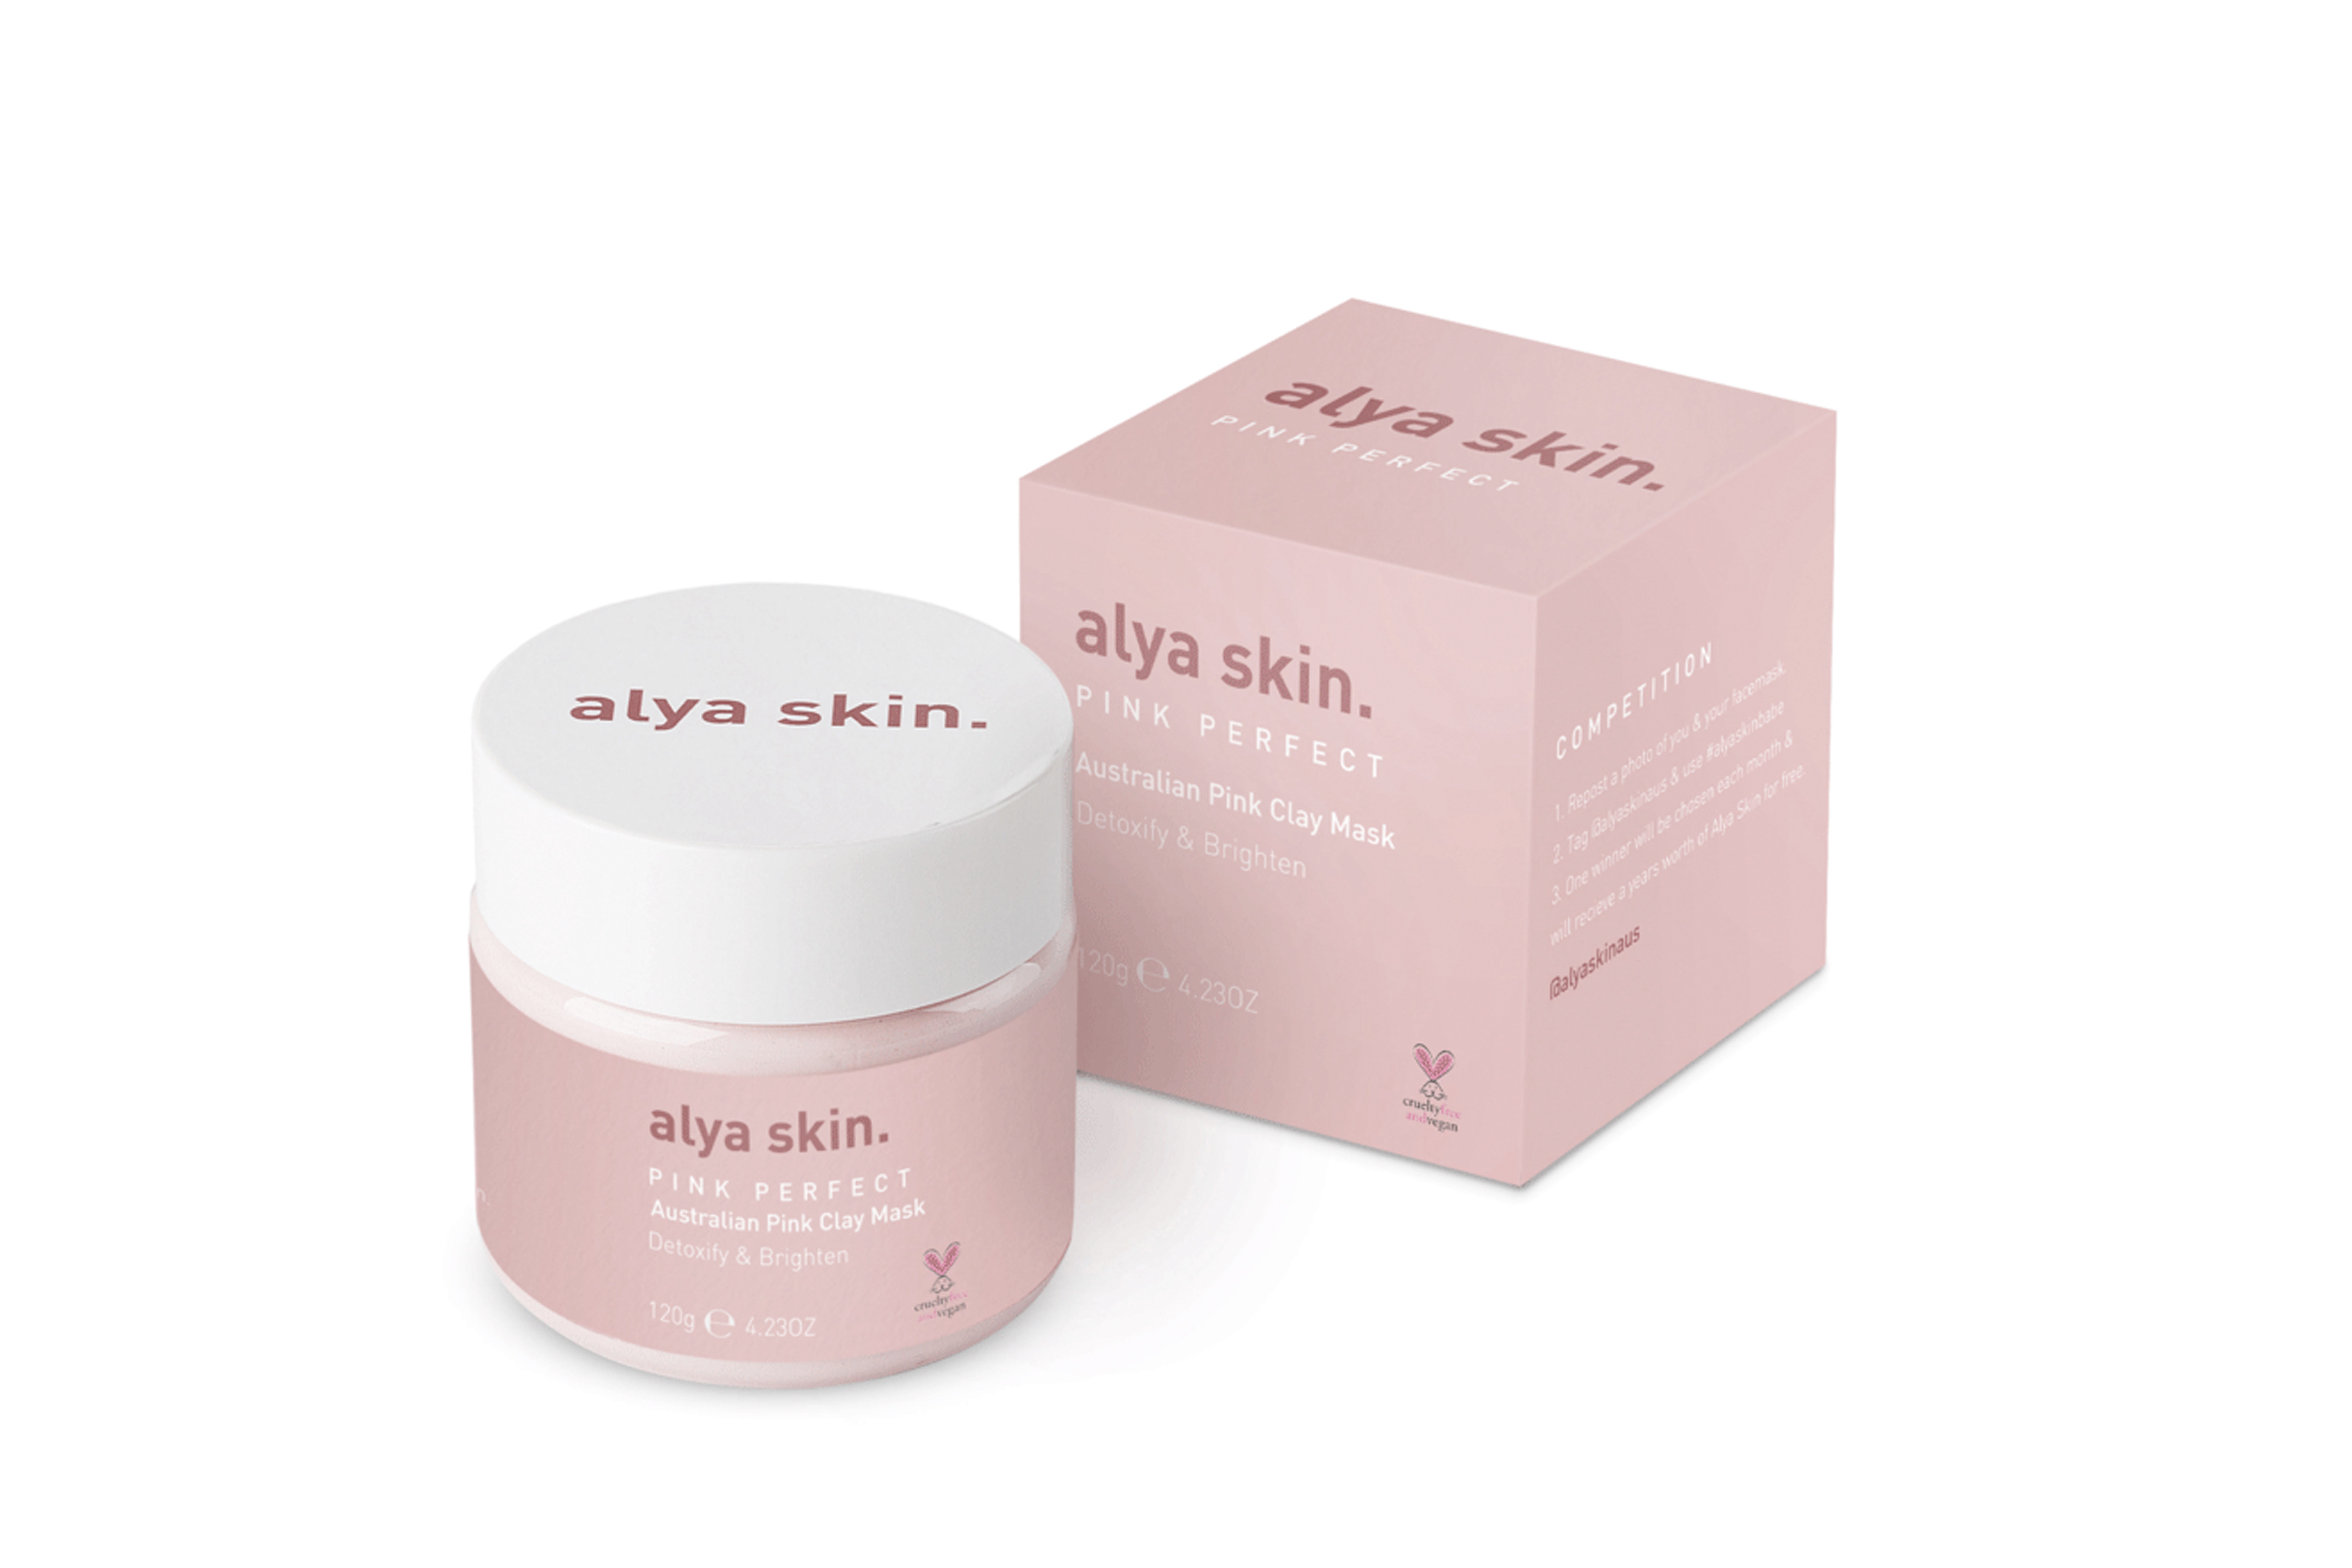 Alya Skin Pink Australian Clay Mask Review Skincare Mud Beauty Routine Test